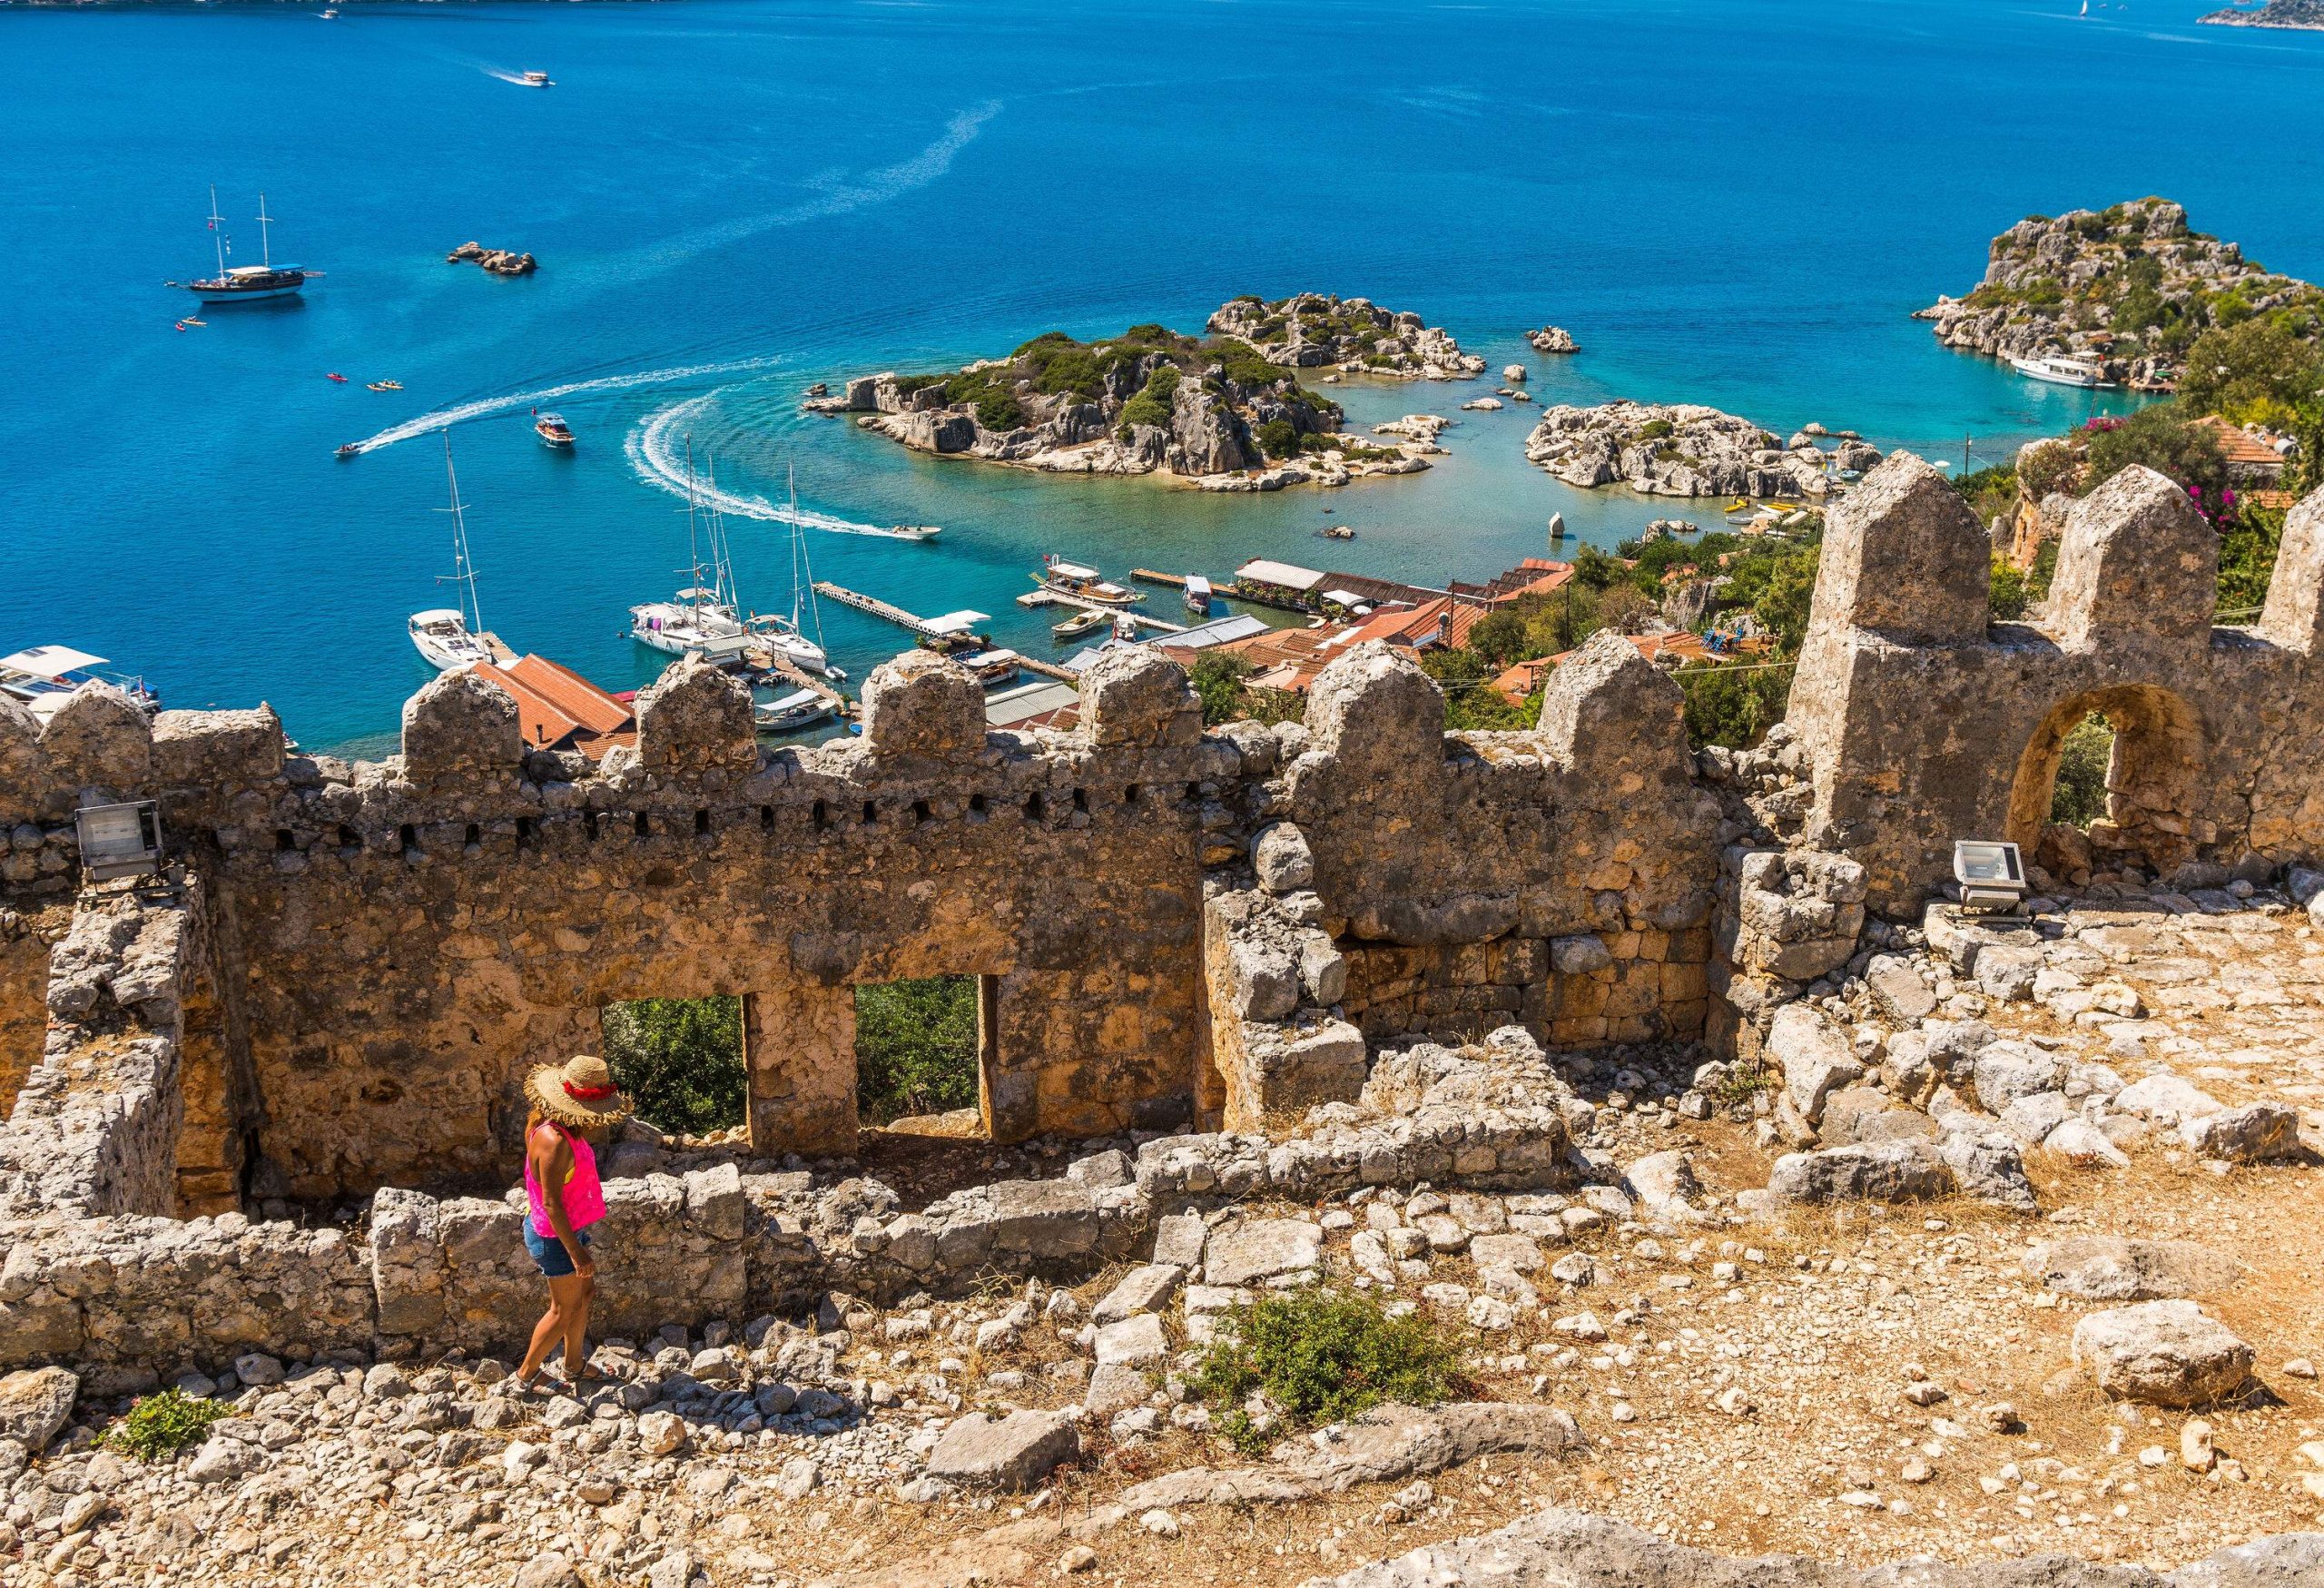 A female tourist wanders around a ruined castle overlooking several boats and the blue bay.